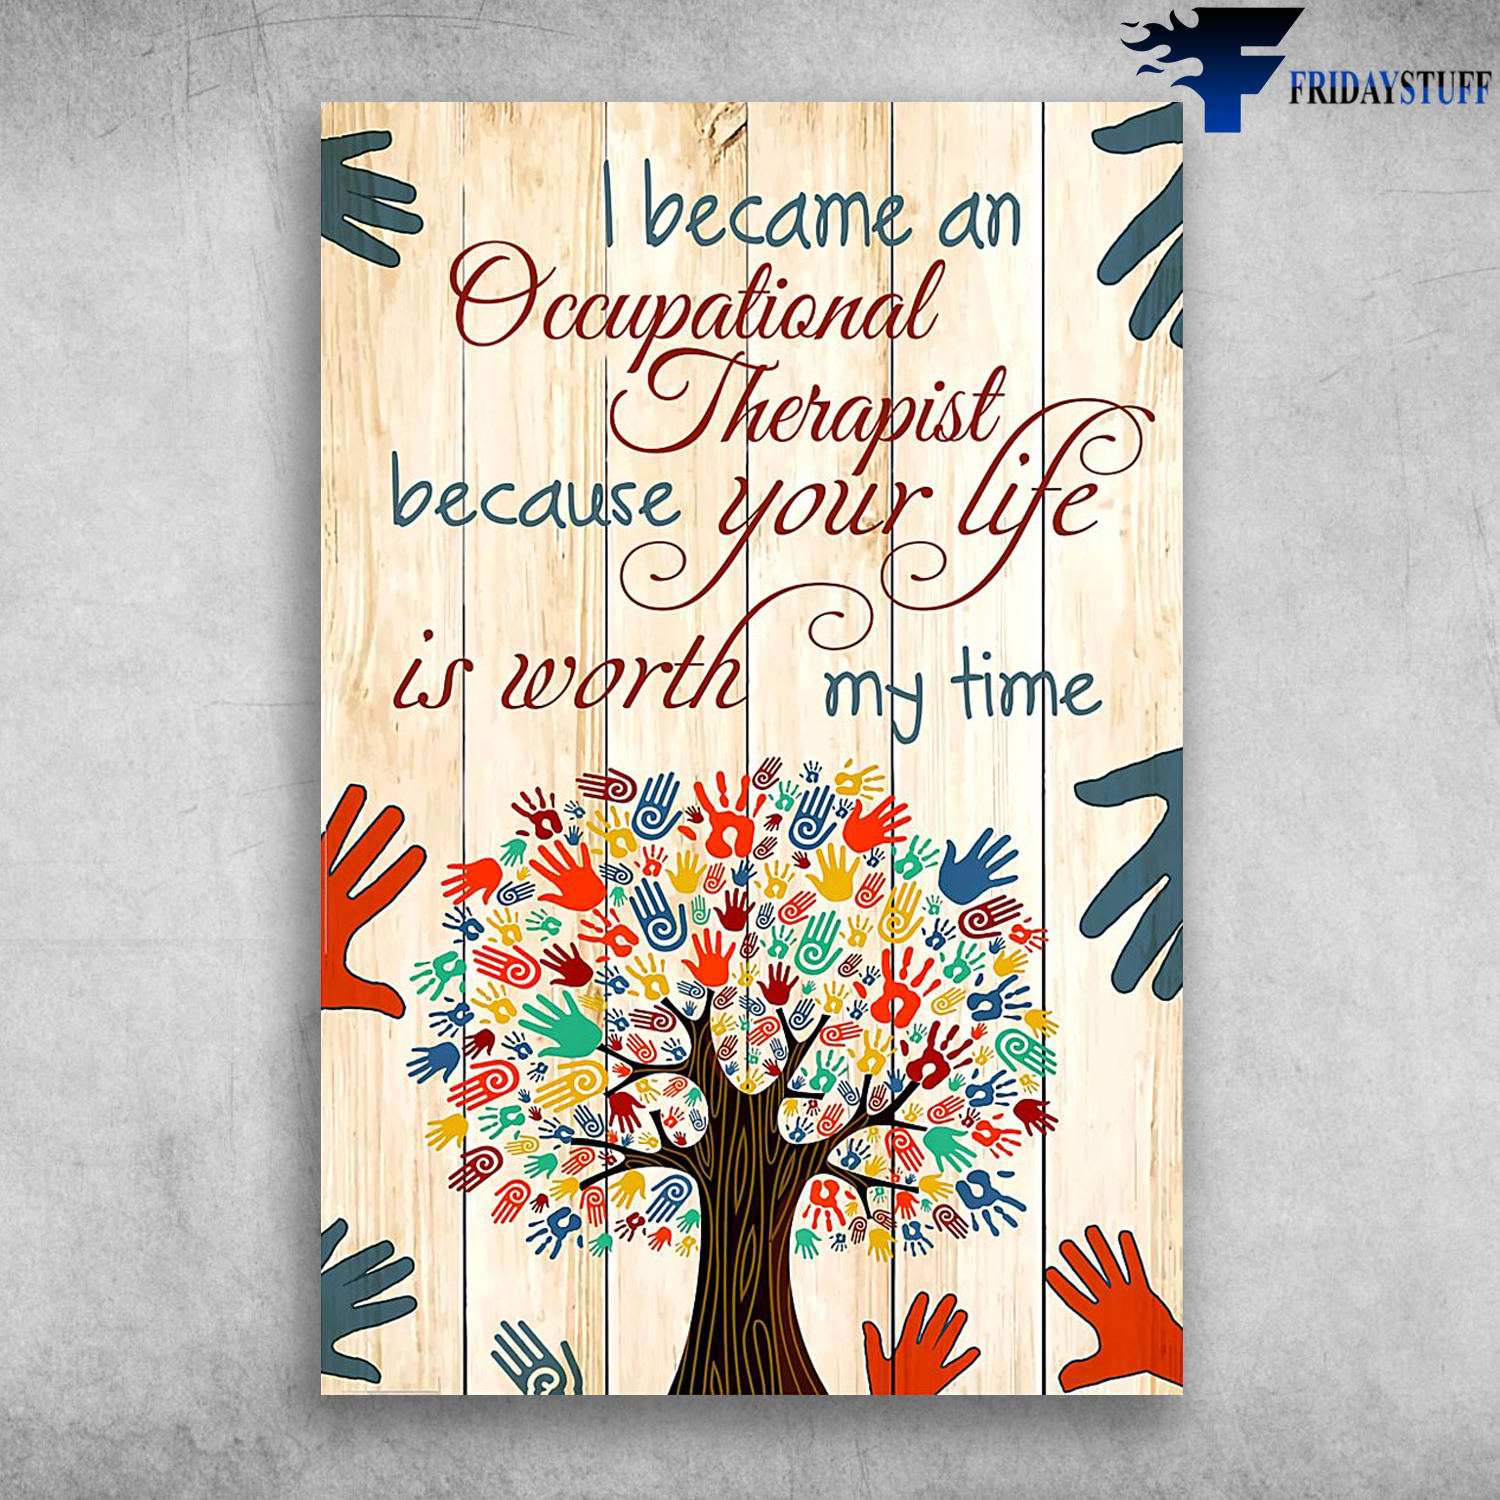 Hand Tree I Becam An Occupational Therapist Because Your Life